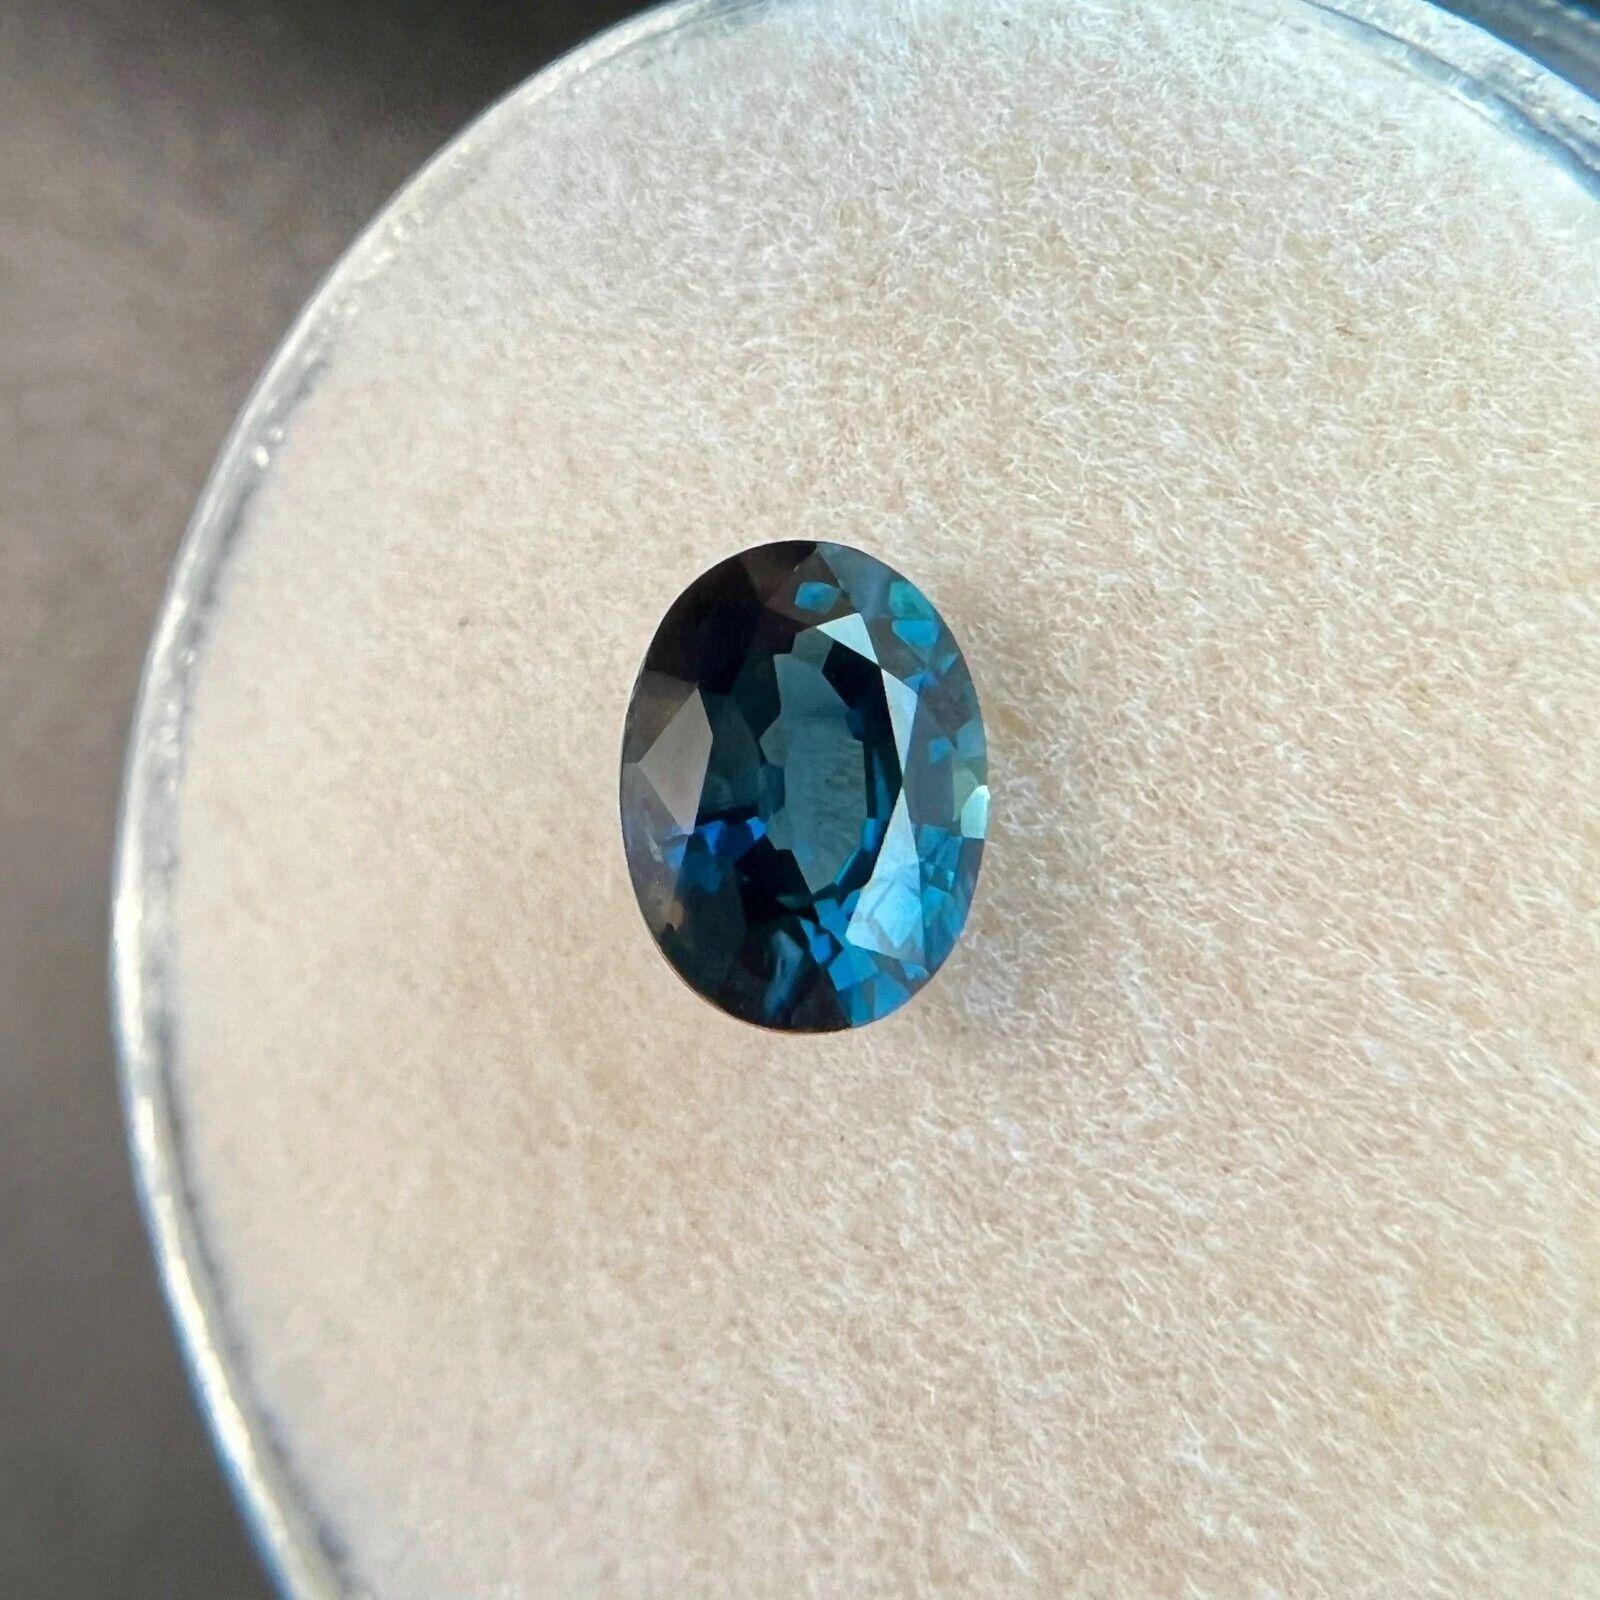 Women's or Men's 1.09ct AIG Certified Deep Rare Blue Sapphire Oval Cut Loose Gemstone For Sale